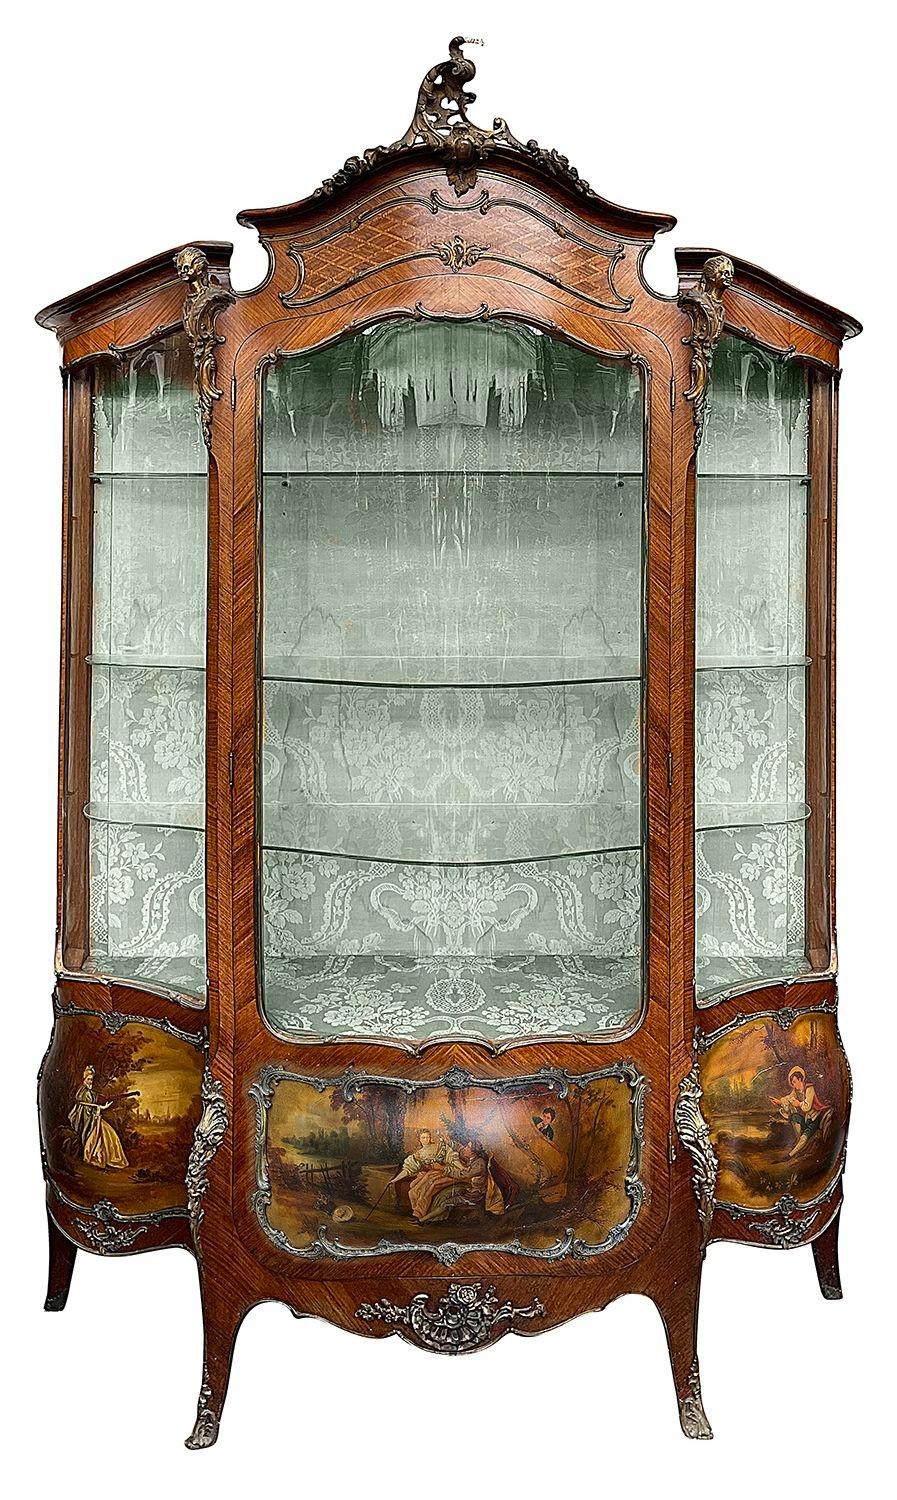 Matched pair of 19th Century French Kingwood serpentine fronted vitrines, each with classical gilded ormolu mounts, adjustable shelves within, Verni Martin hand painted panels depicting romantic scenes, and raised on out swept legs, terminating in